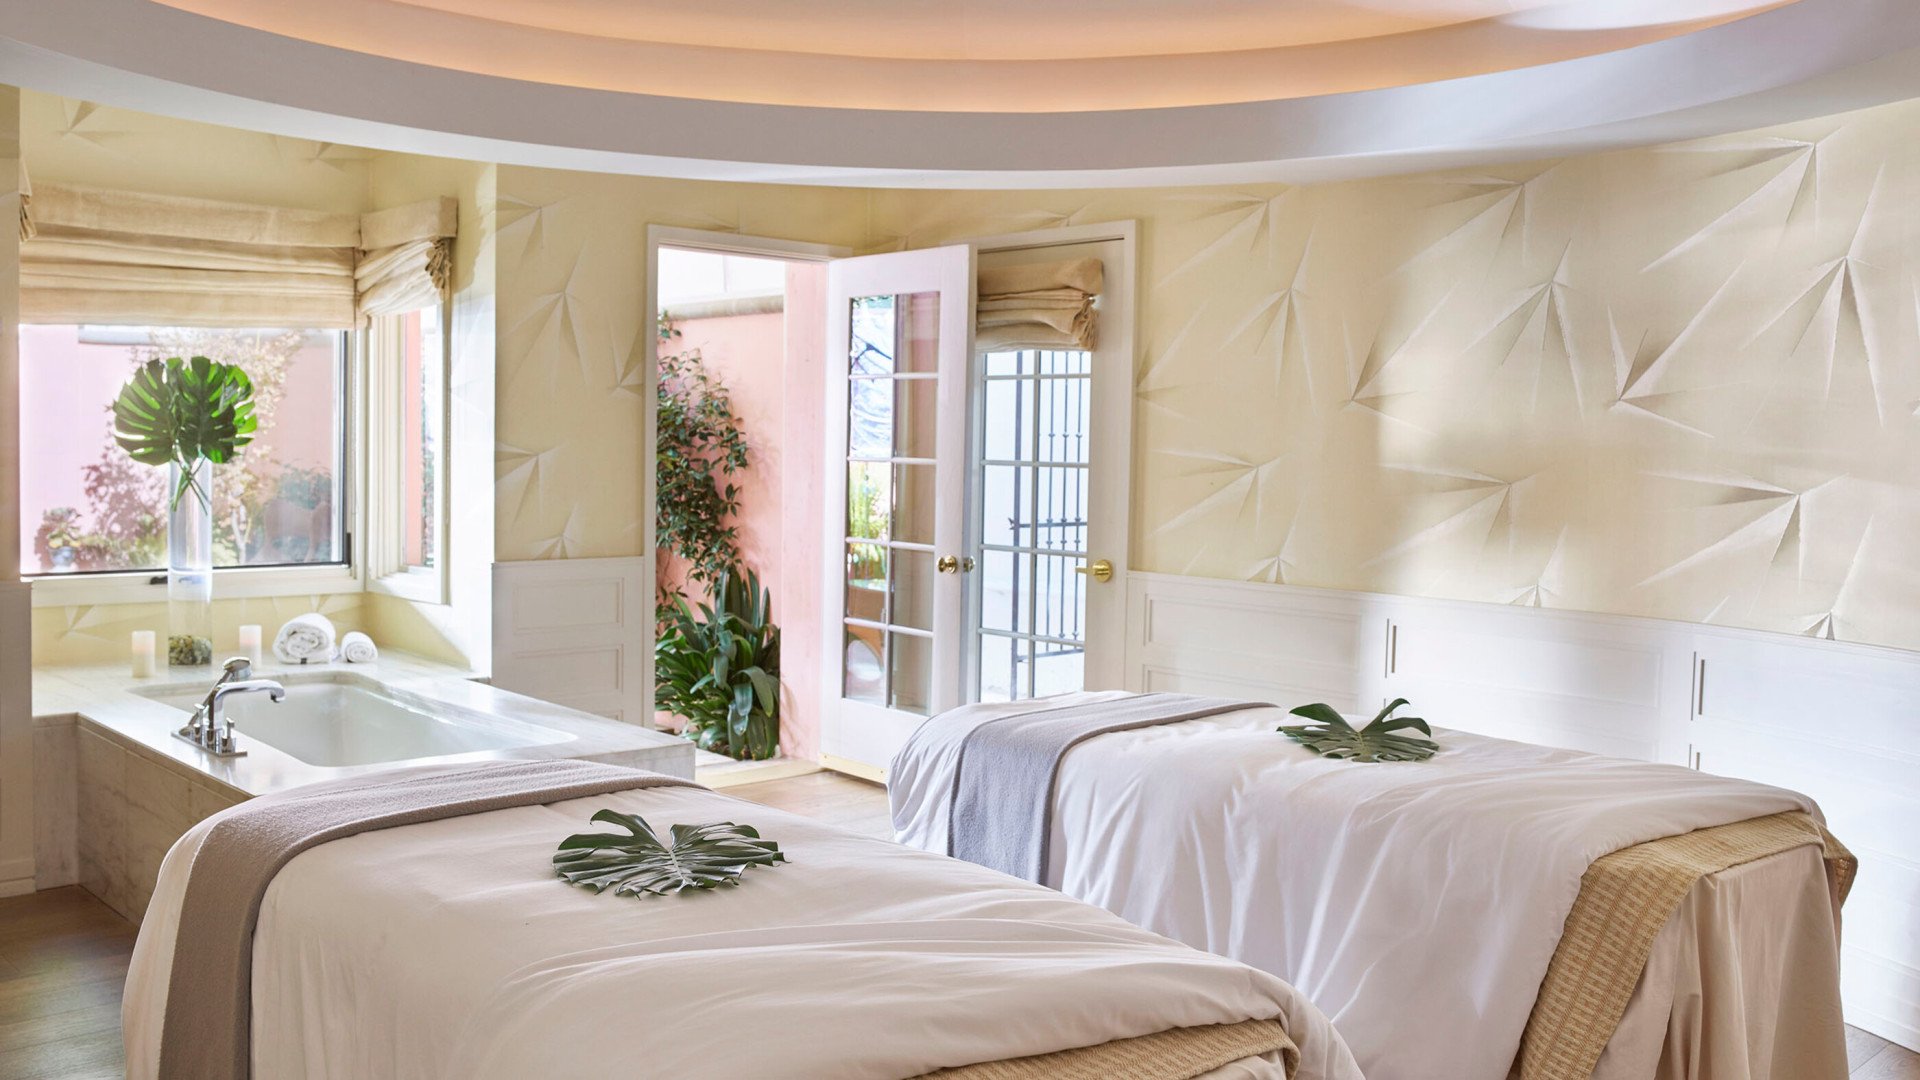 Luxury Spa Treatments At Hotel Bel-Air